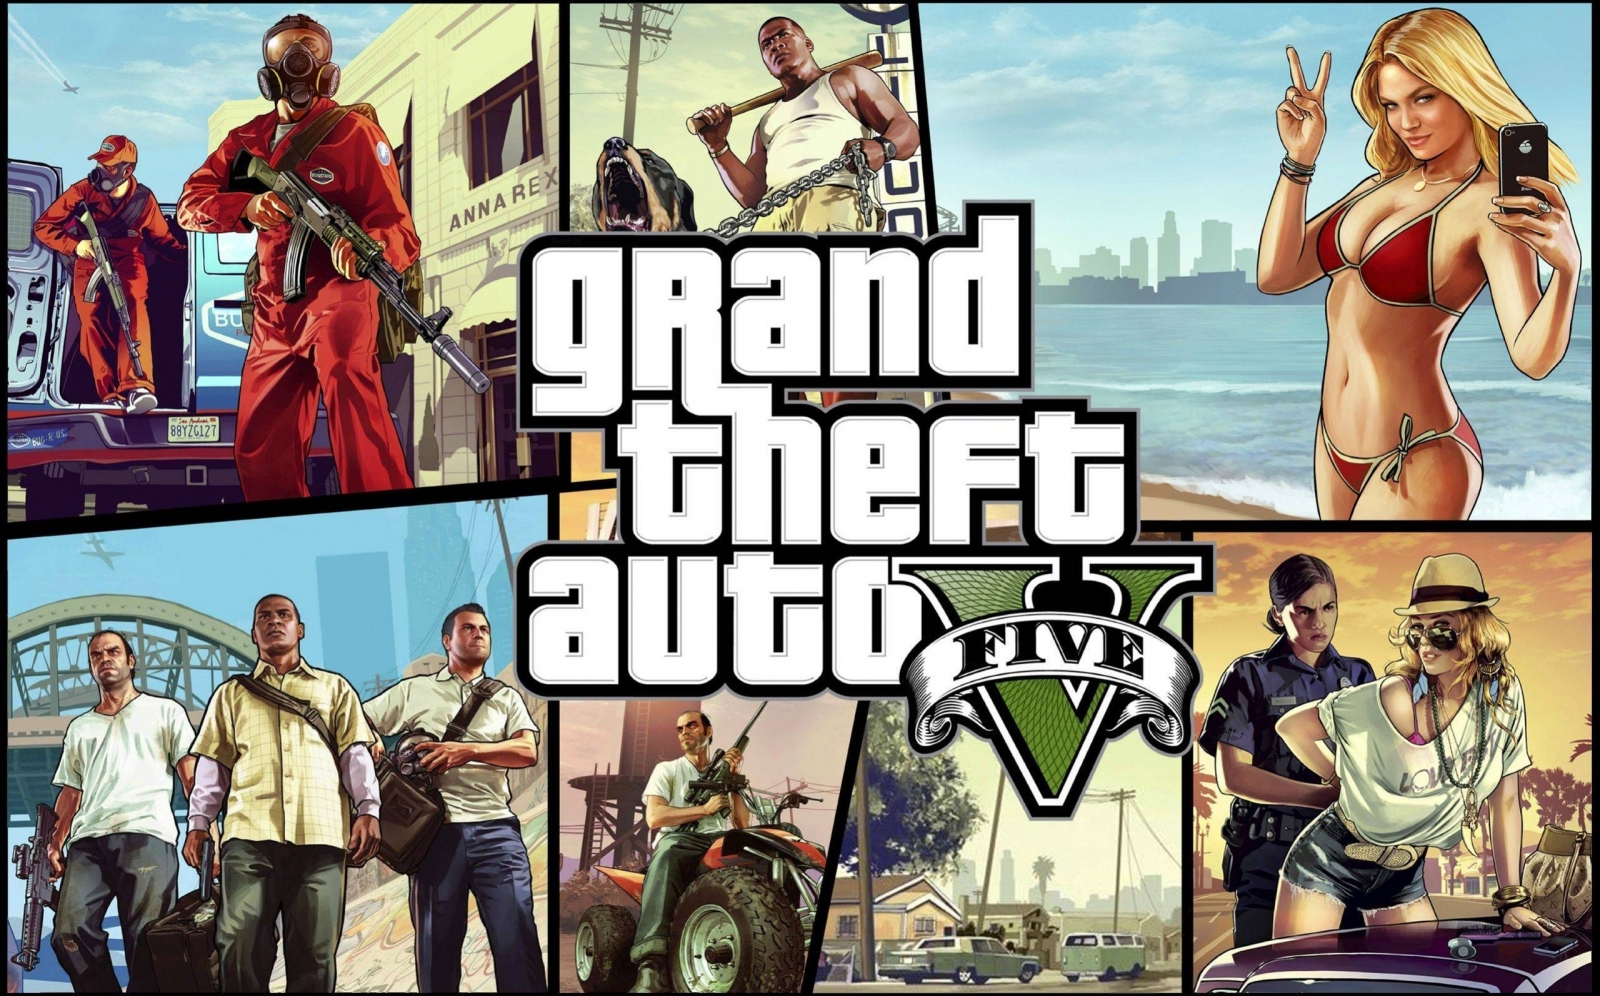 Gta 5 New Dlc Content Update Rockstar Editor For Ps4 And Xbox One Coming Soon